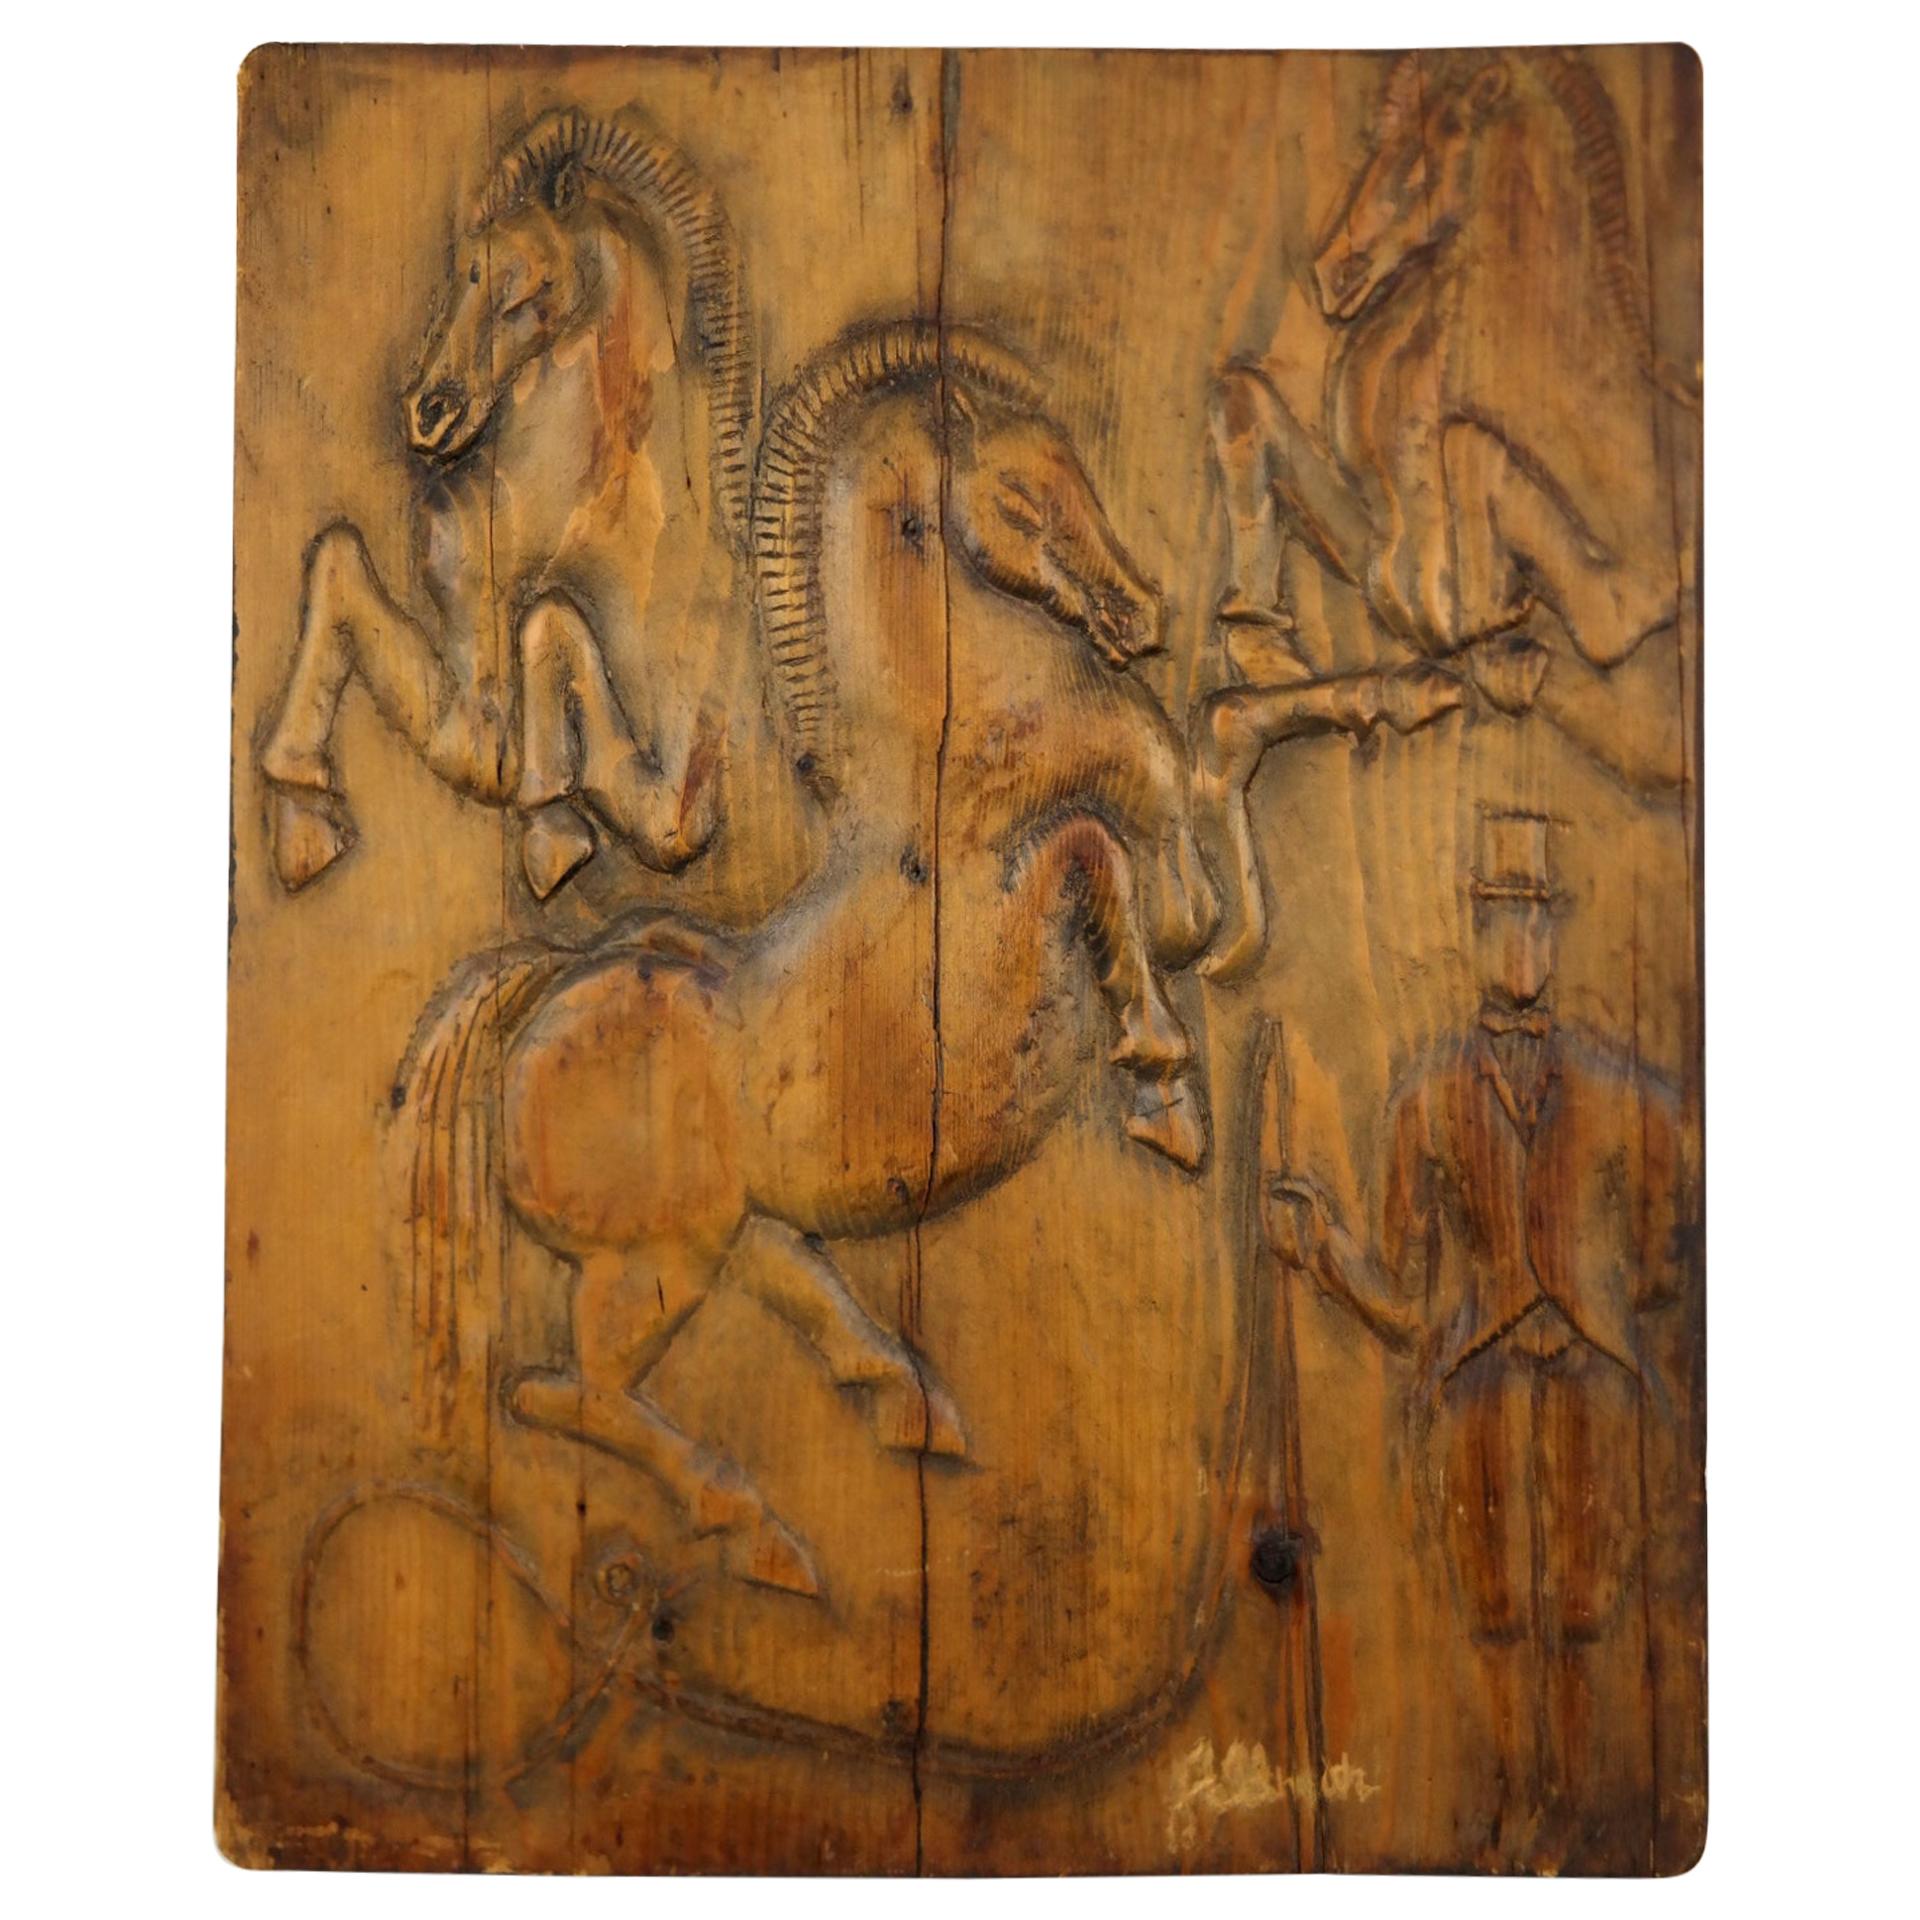 "Circus" Hand Carved Wooden Relief by Artist Feldman, 1970s